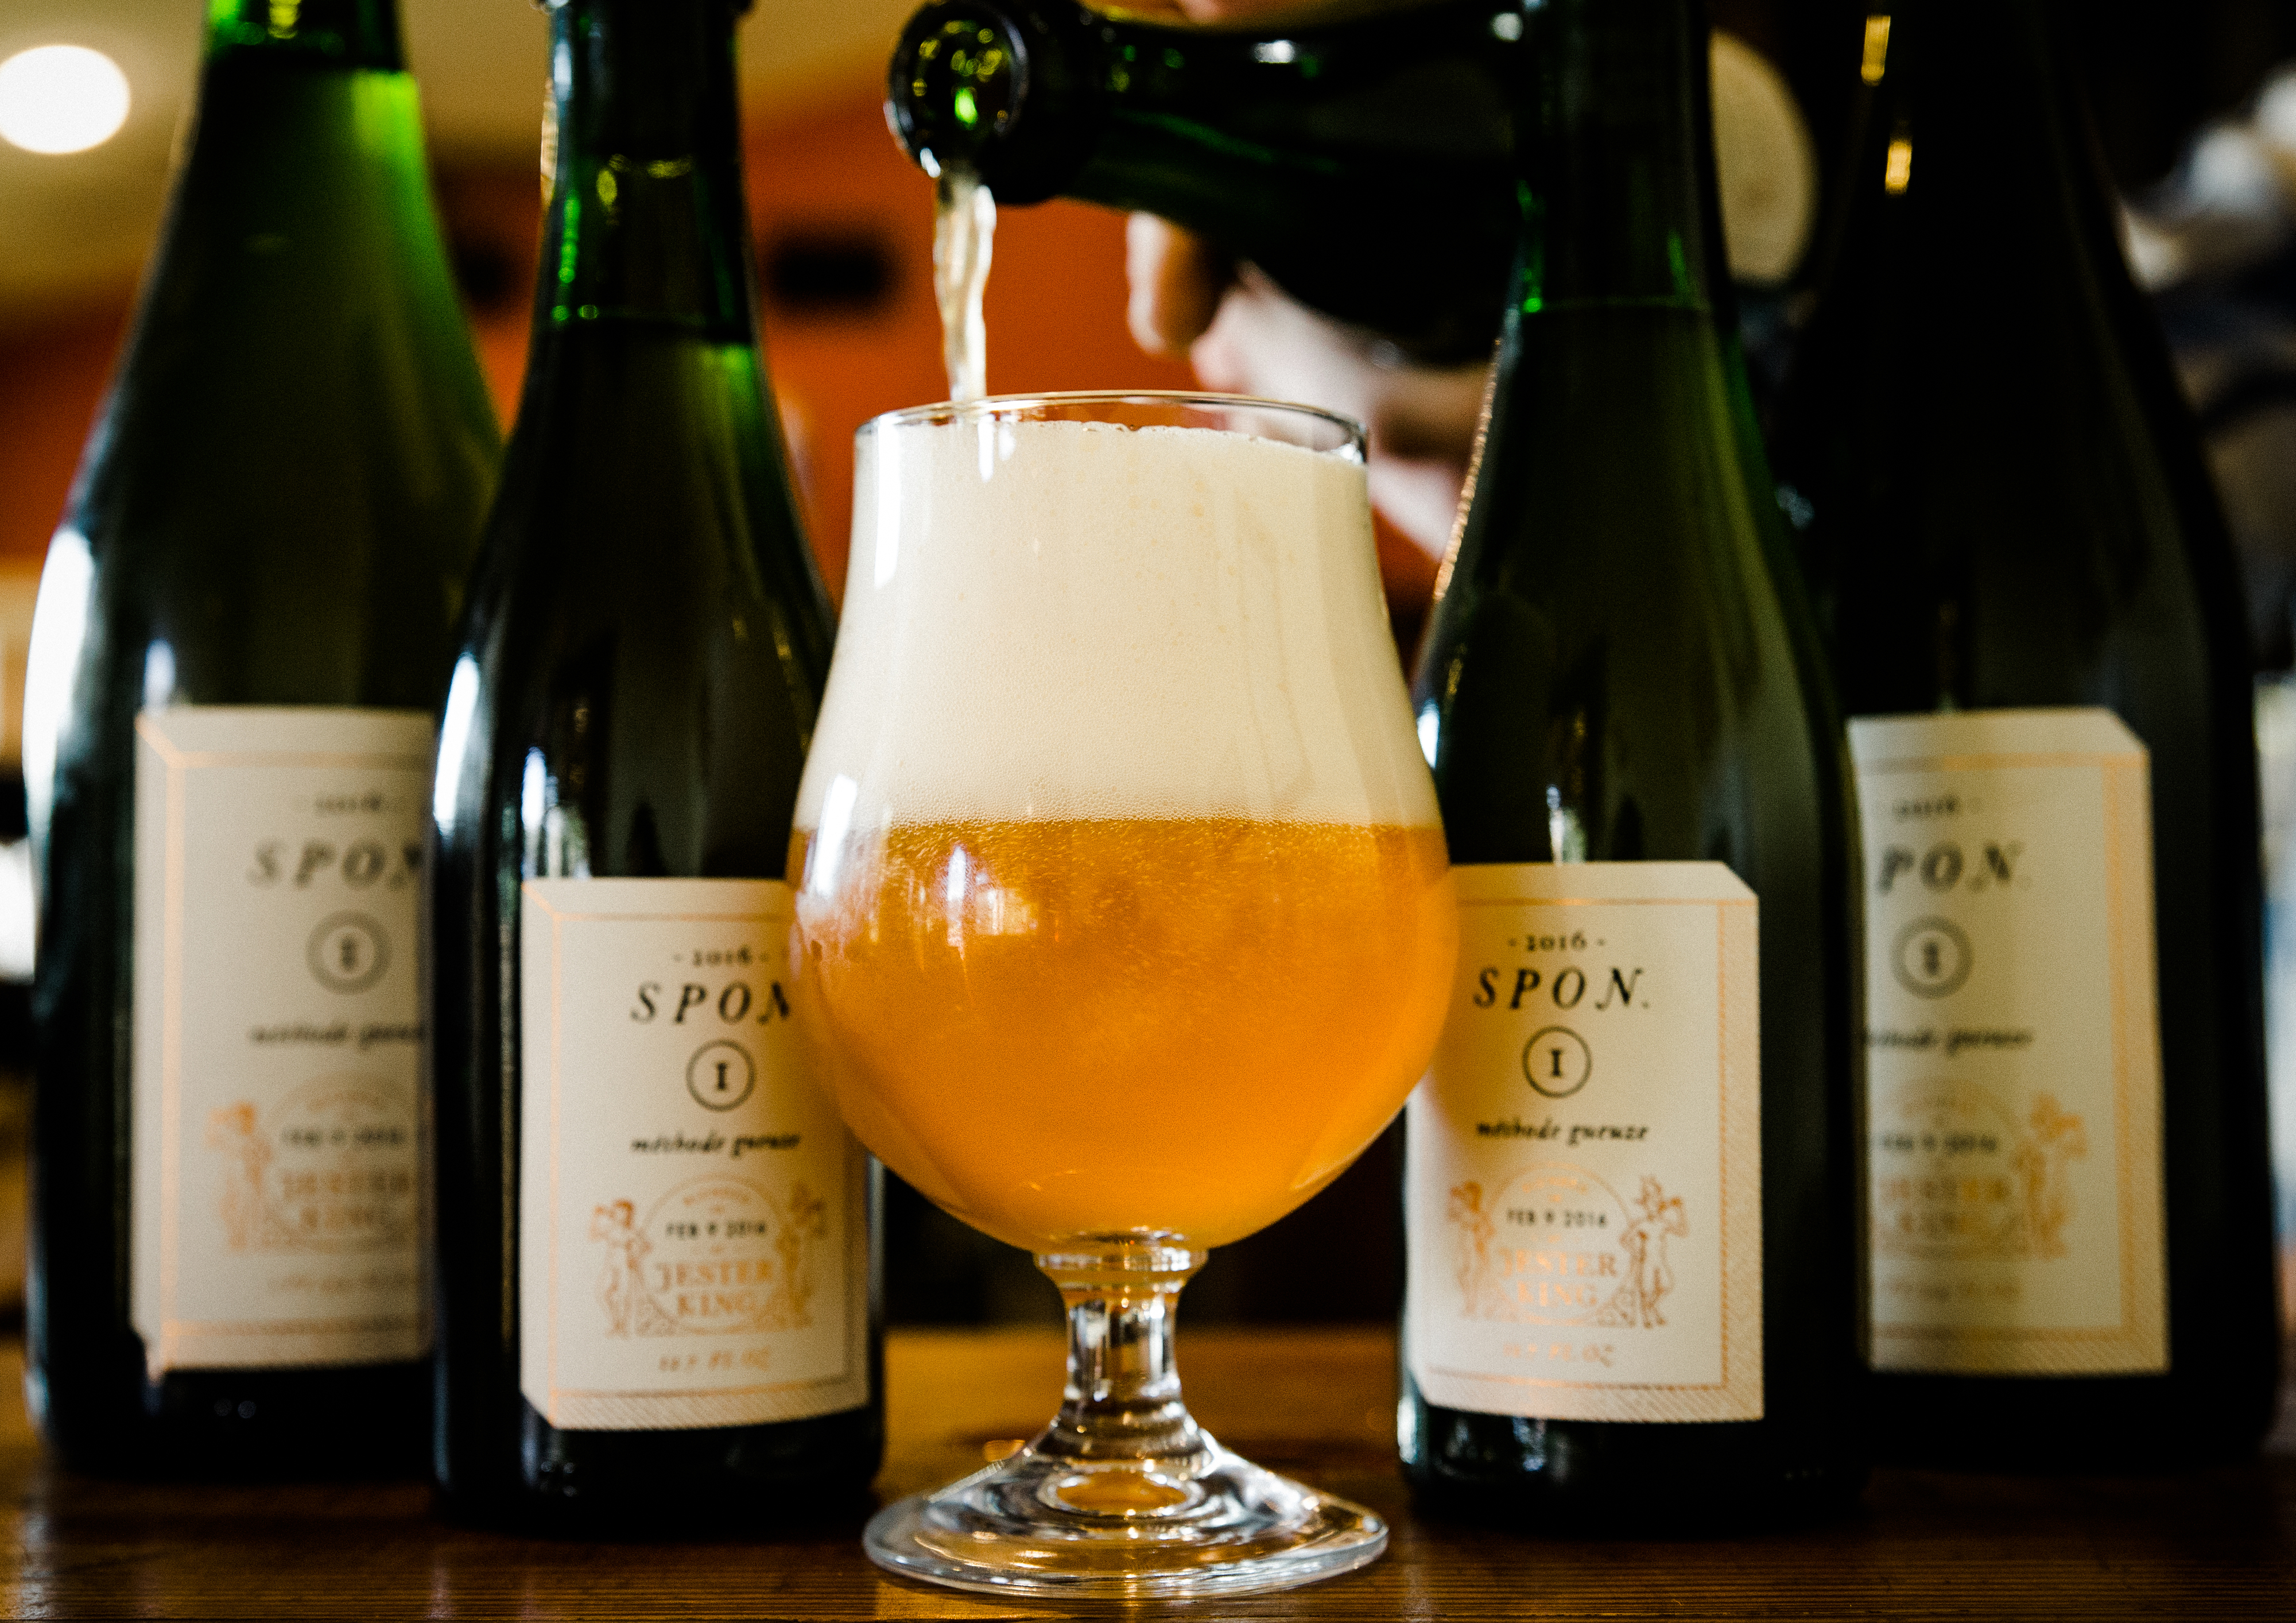 image of Spon Bottles courtesy of Jester King Brewery